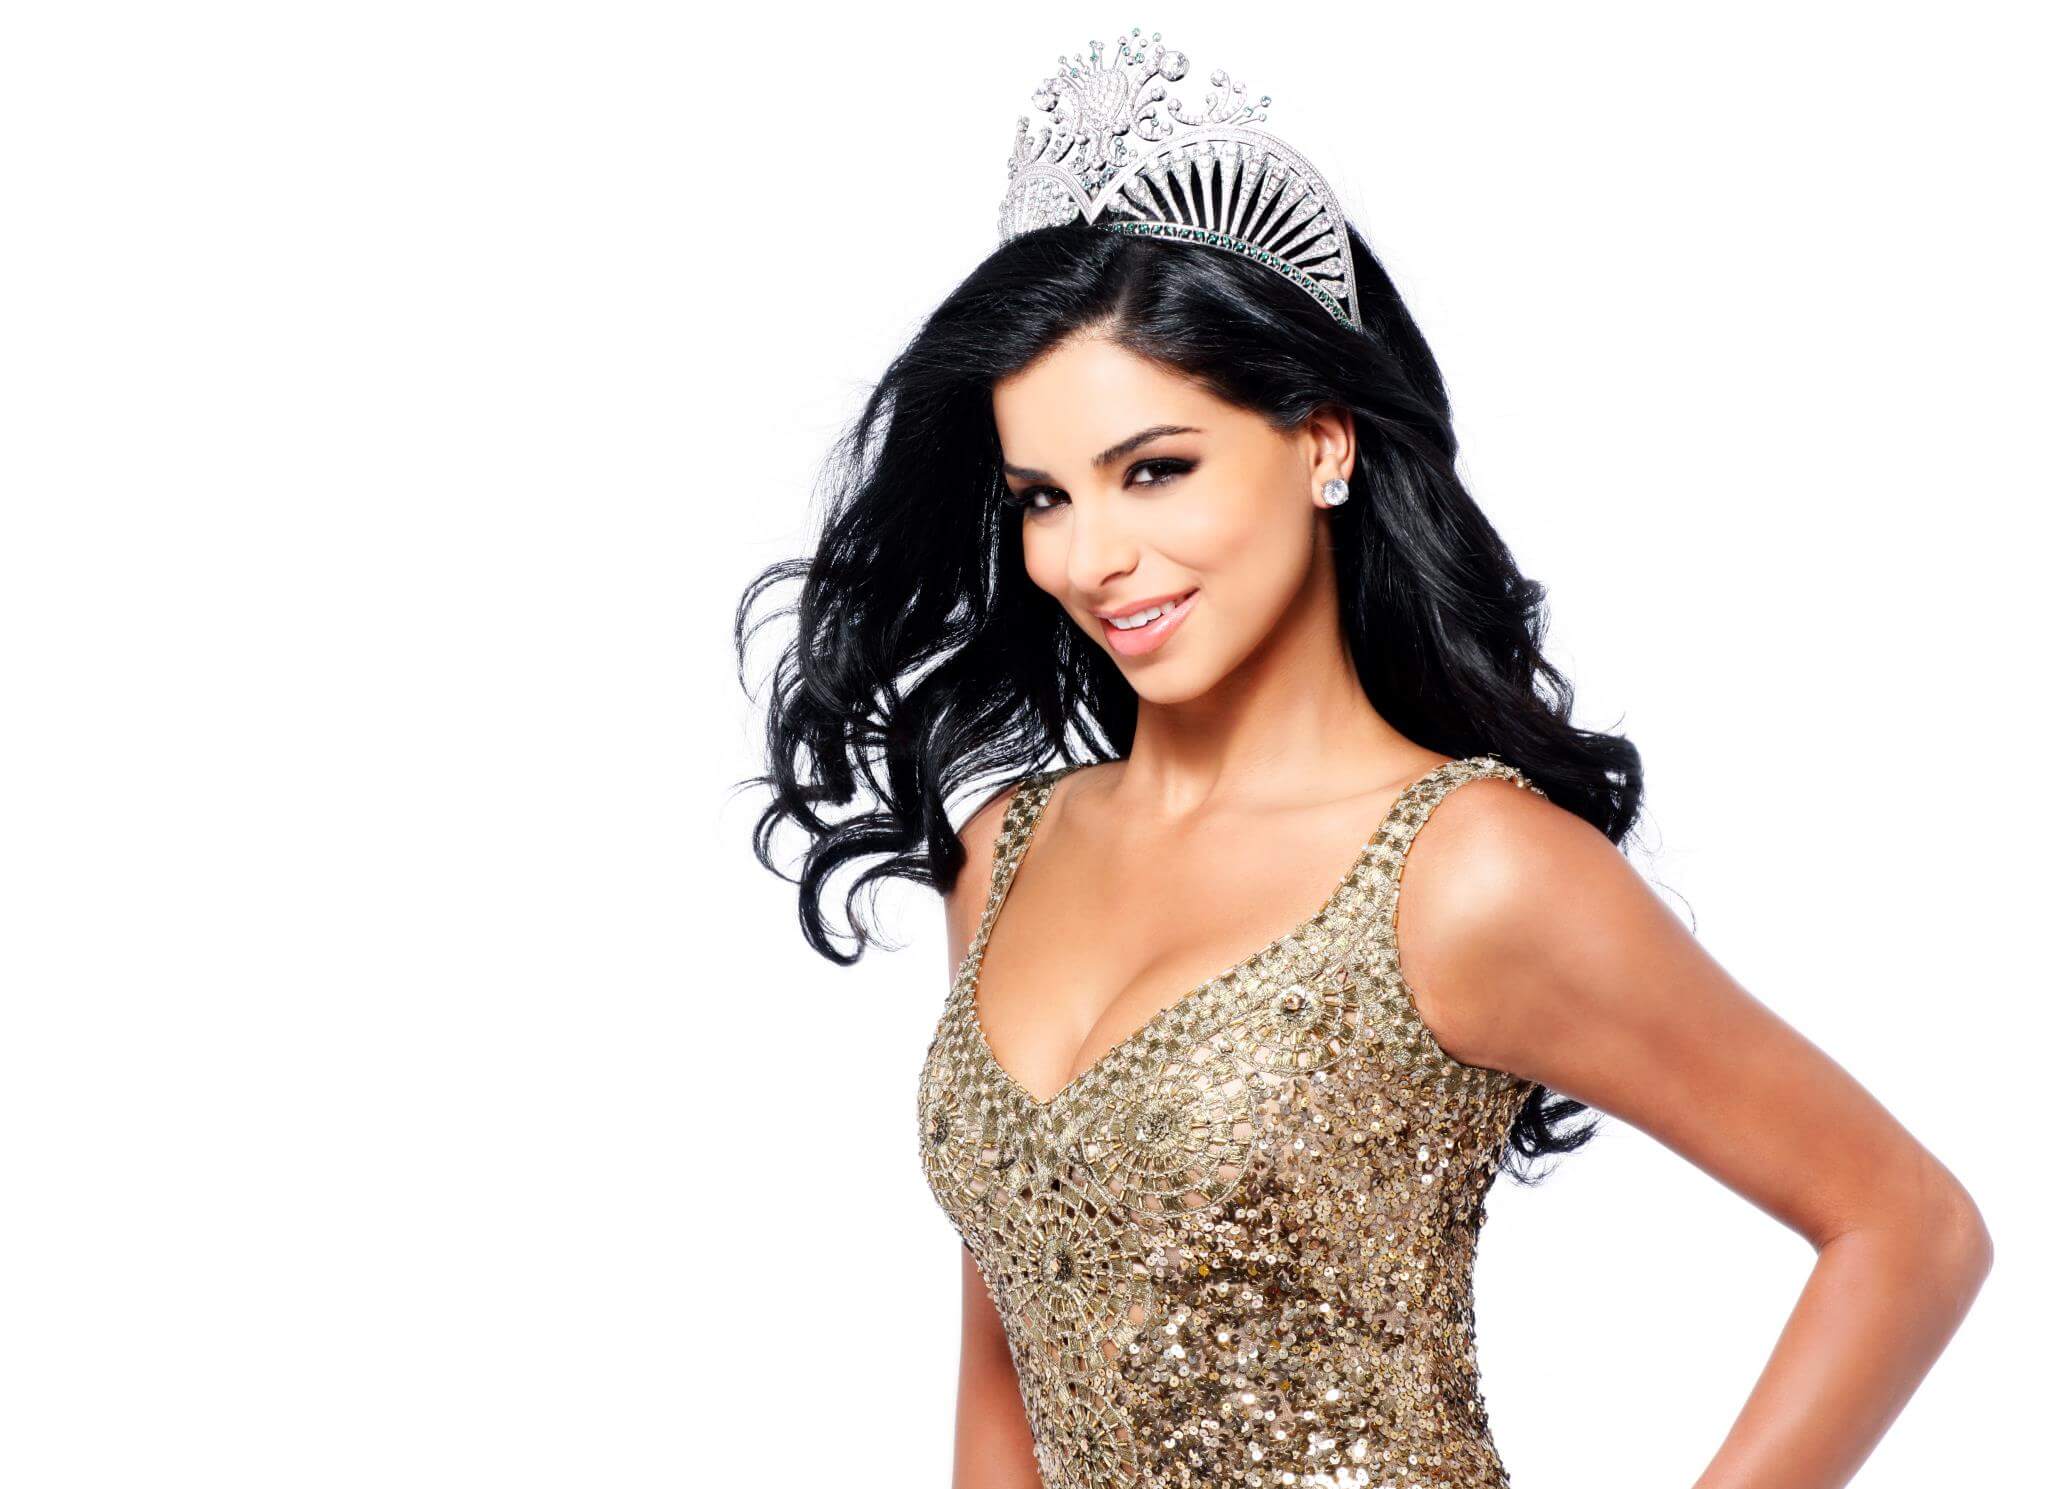 Rima Fakih Wiki, Biography, Age, Model, Family, Images.